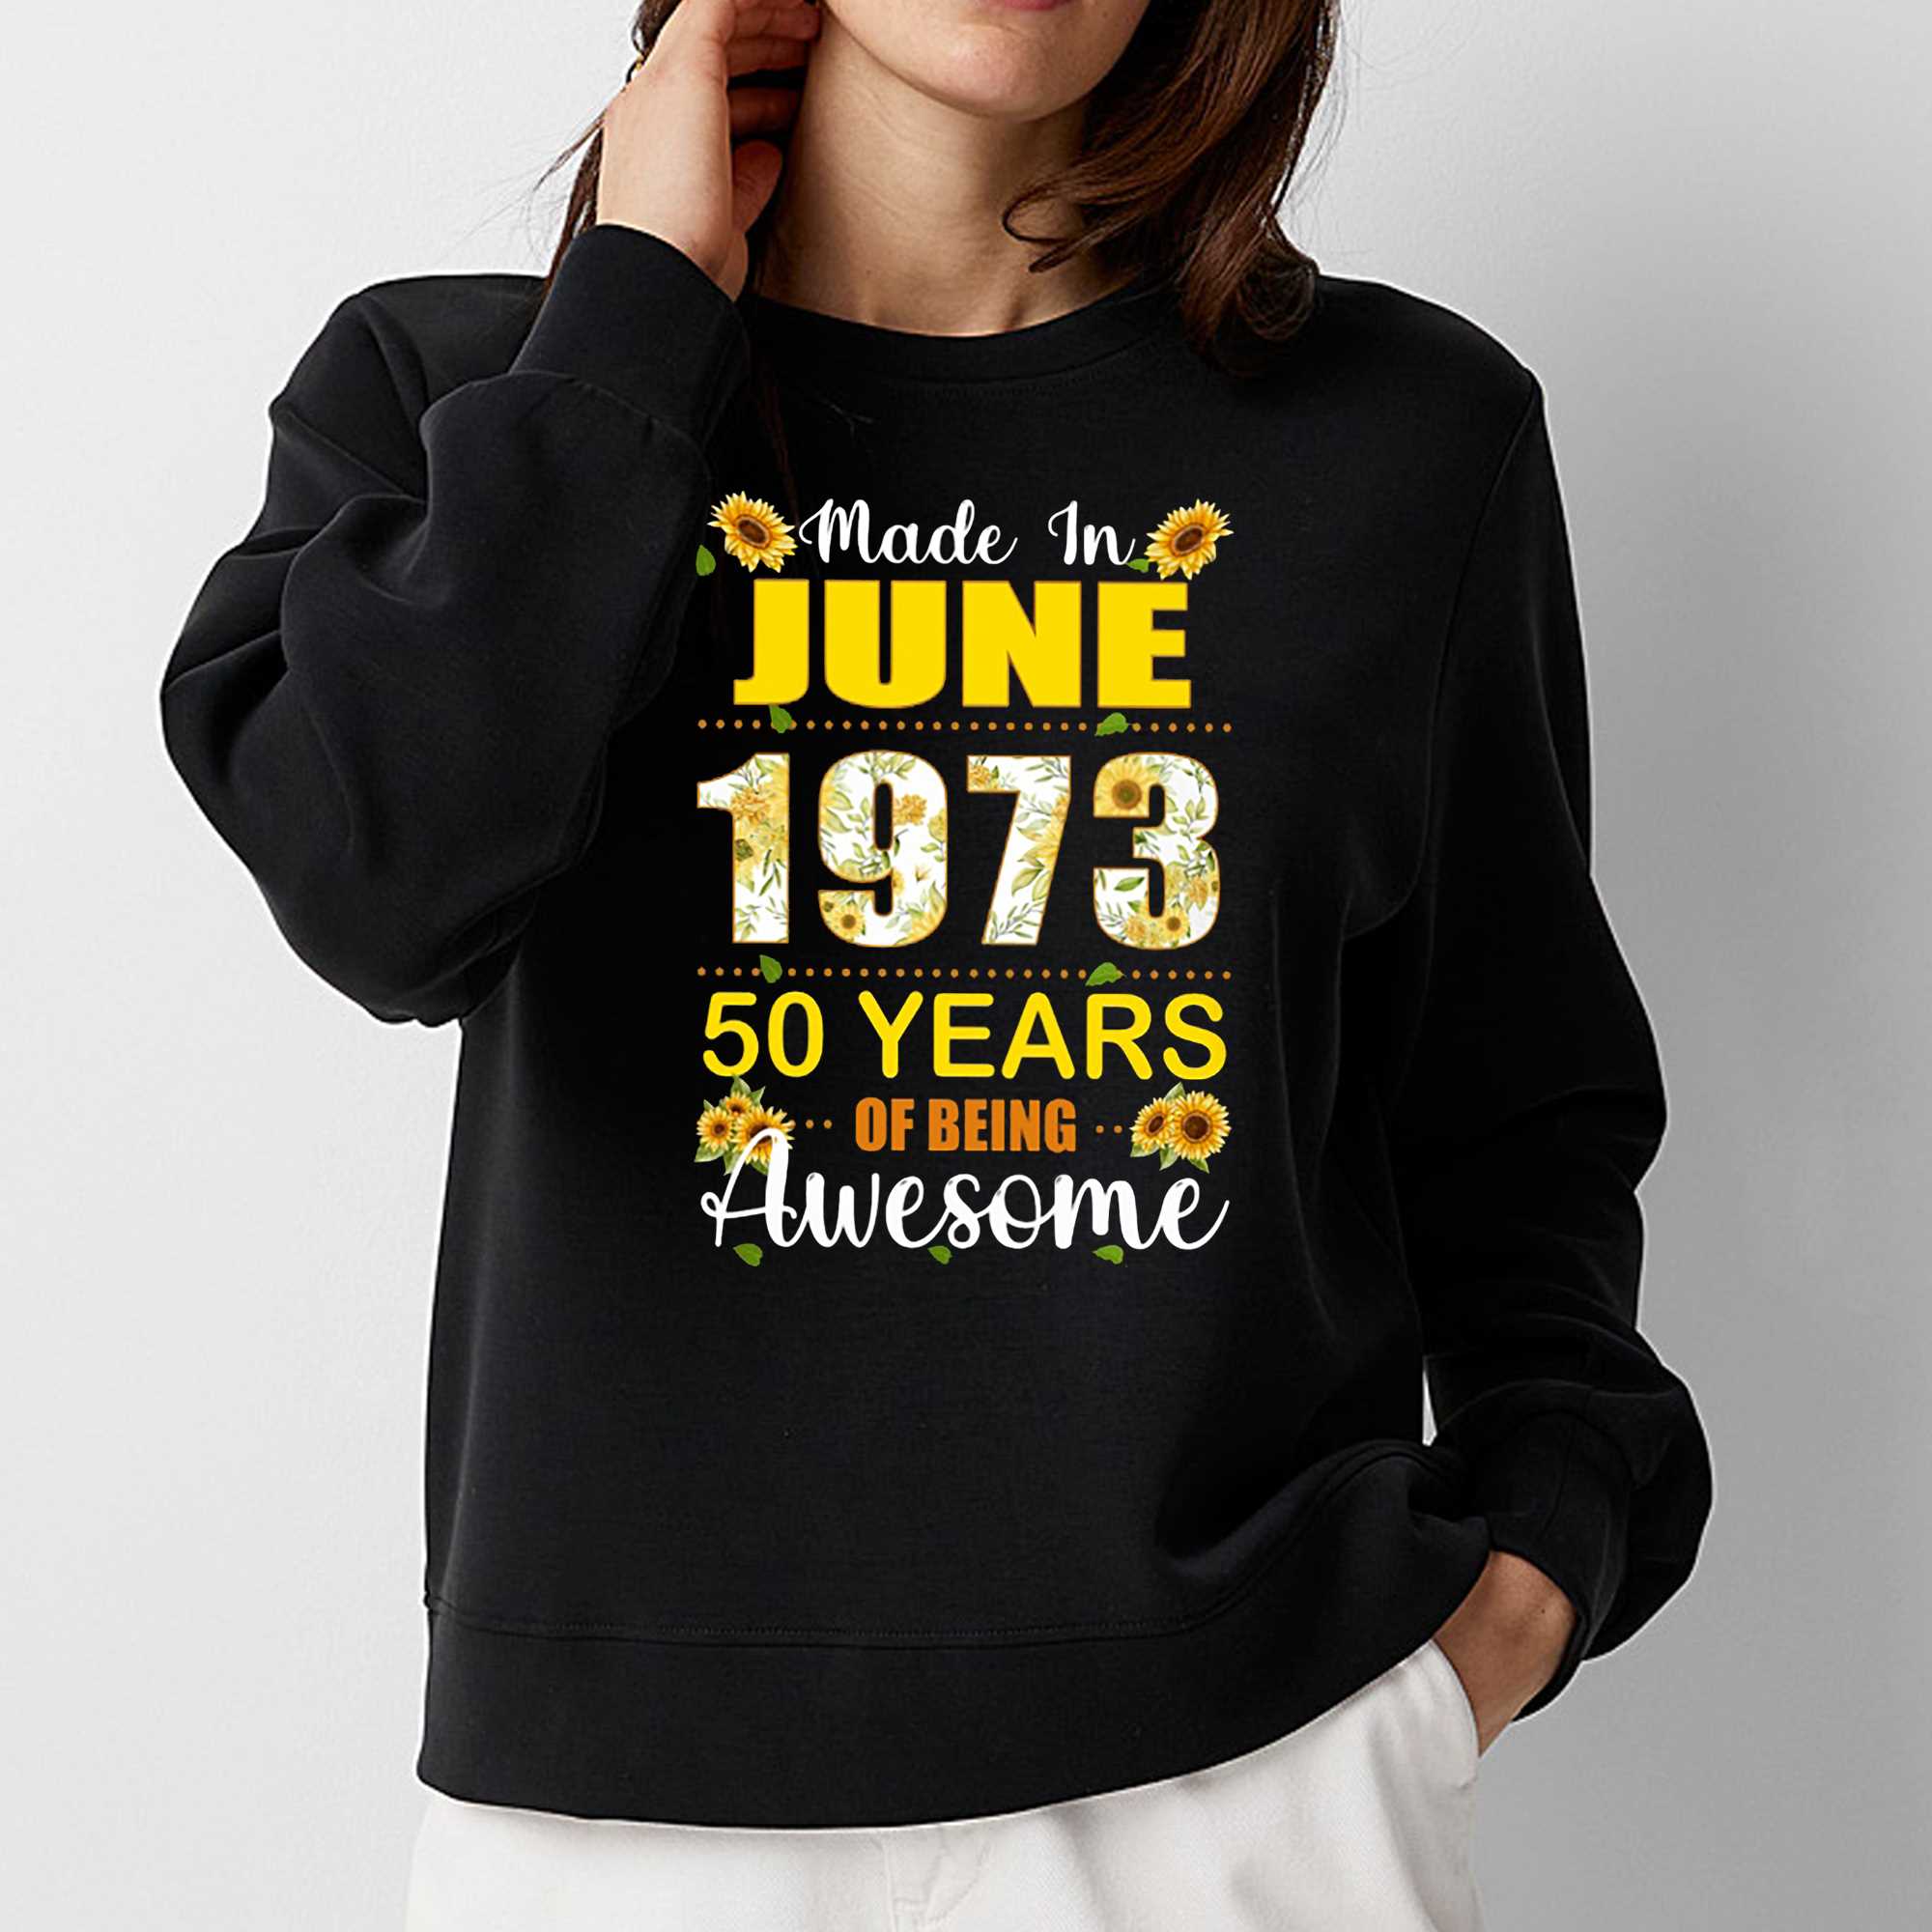 Made In June 1973 50 Years Of Being Awesome Shirt 